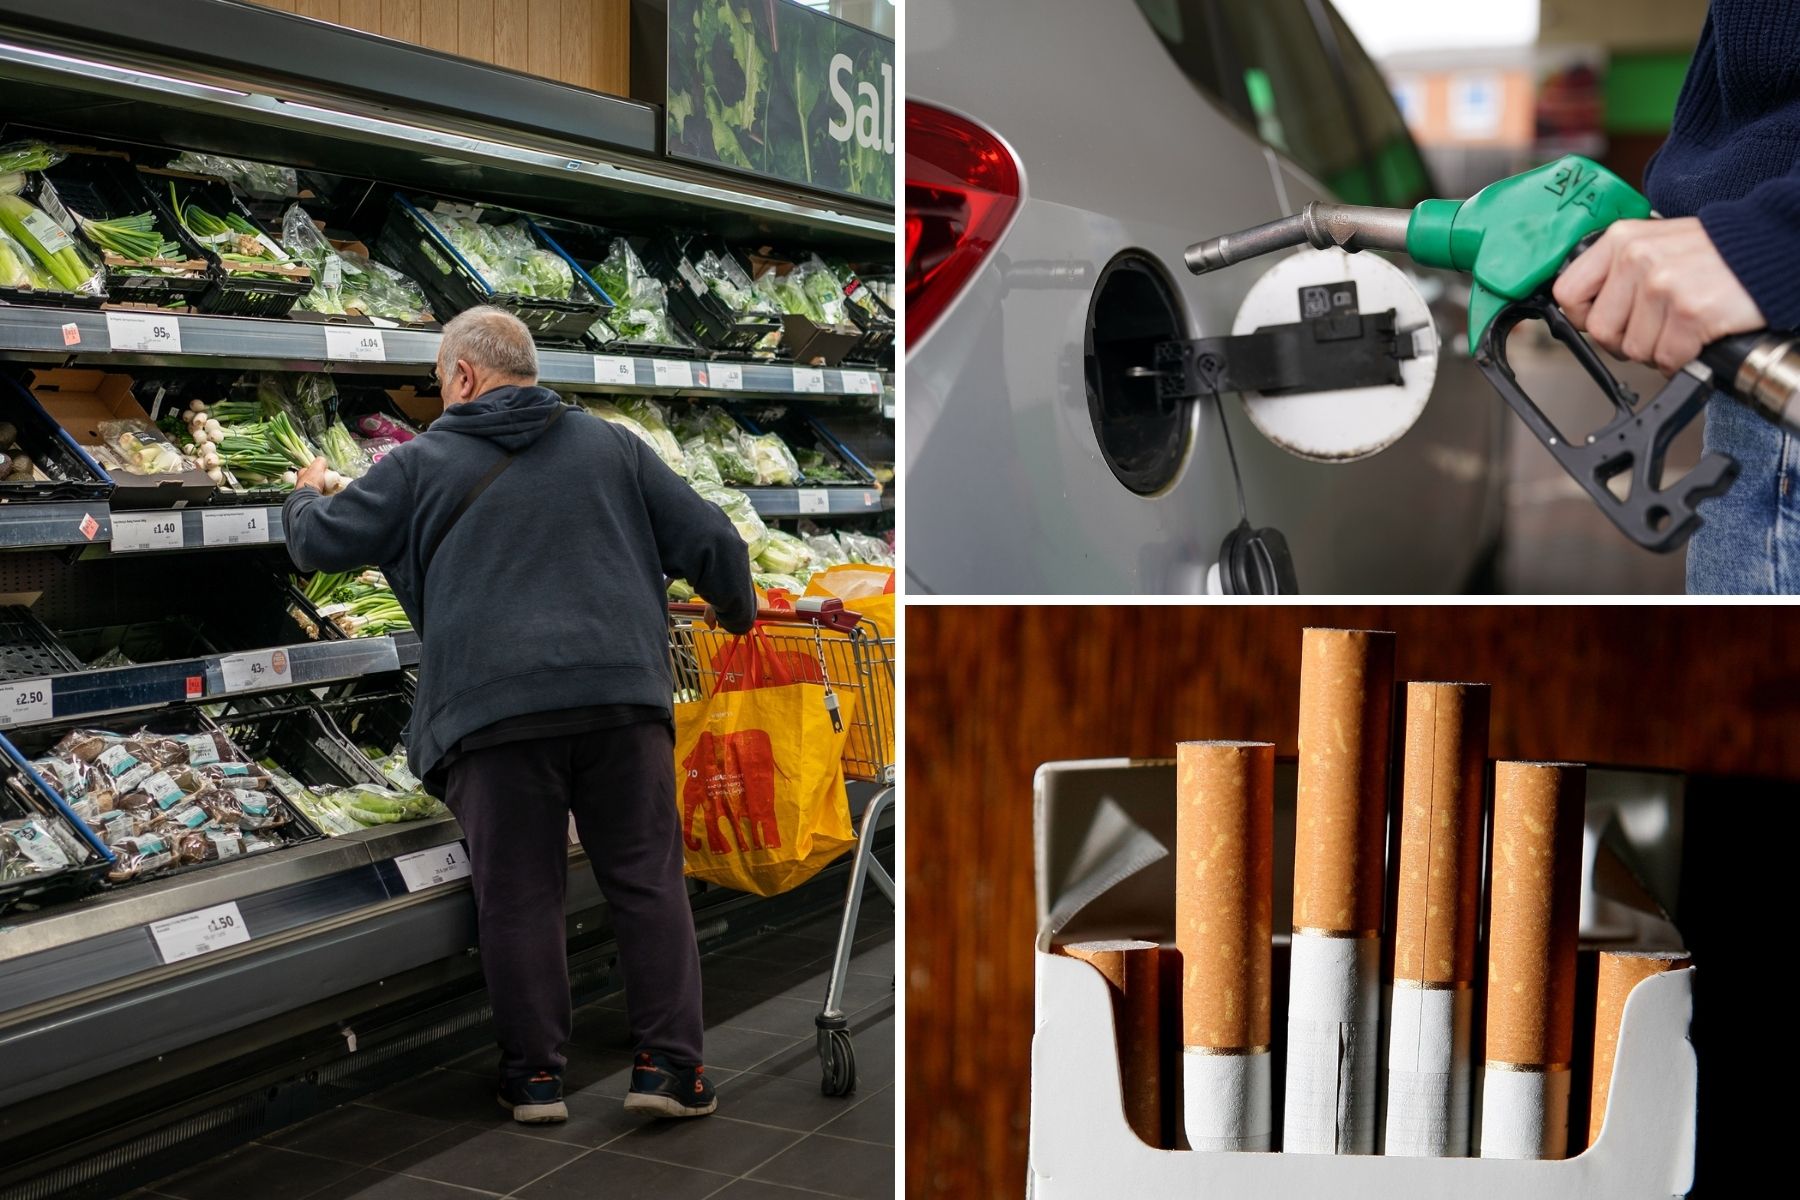 Petrol, food and cigarette prices soar as UK inflation hits 10-year high